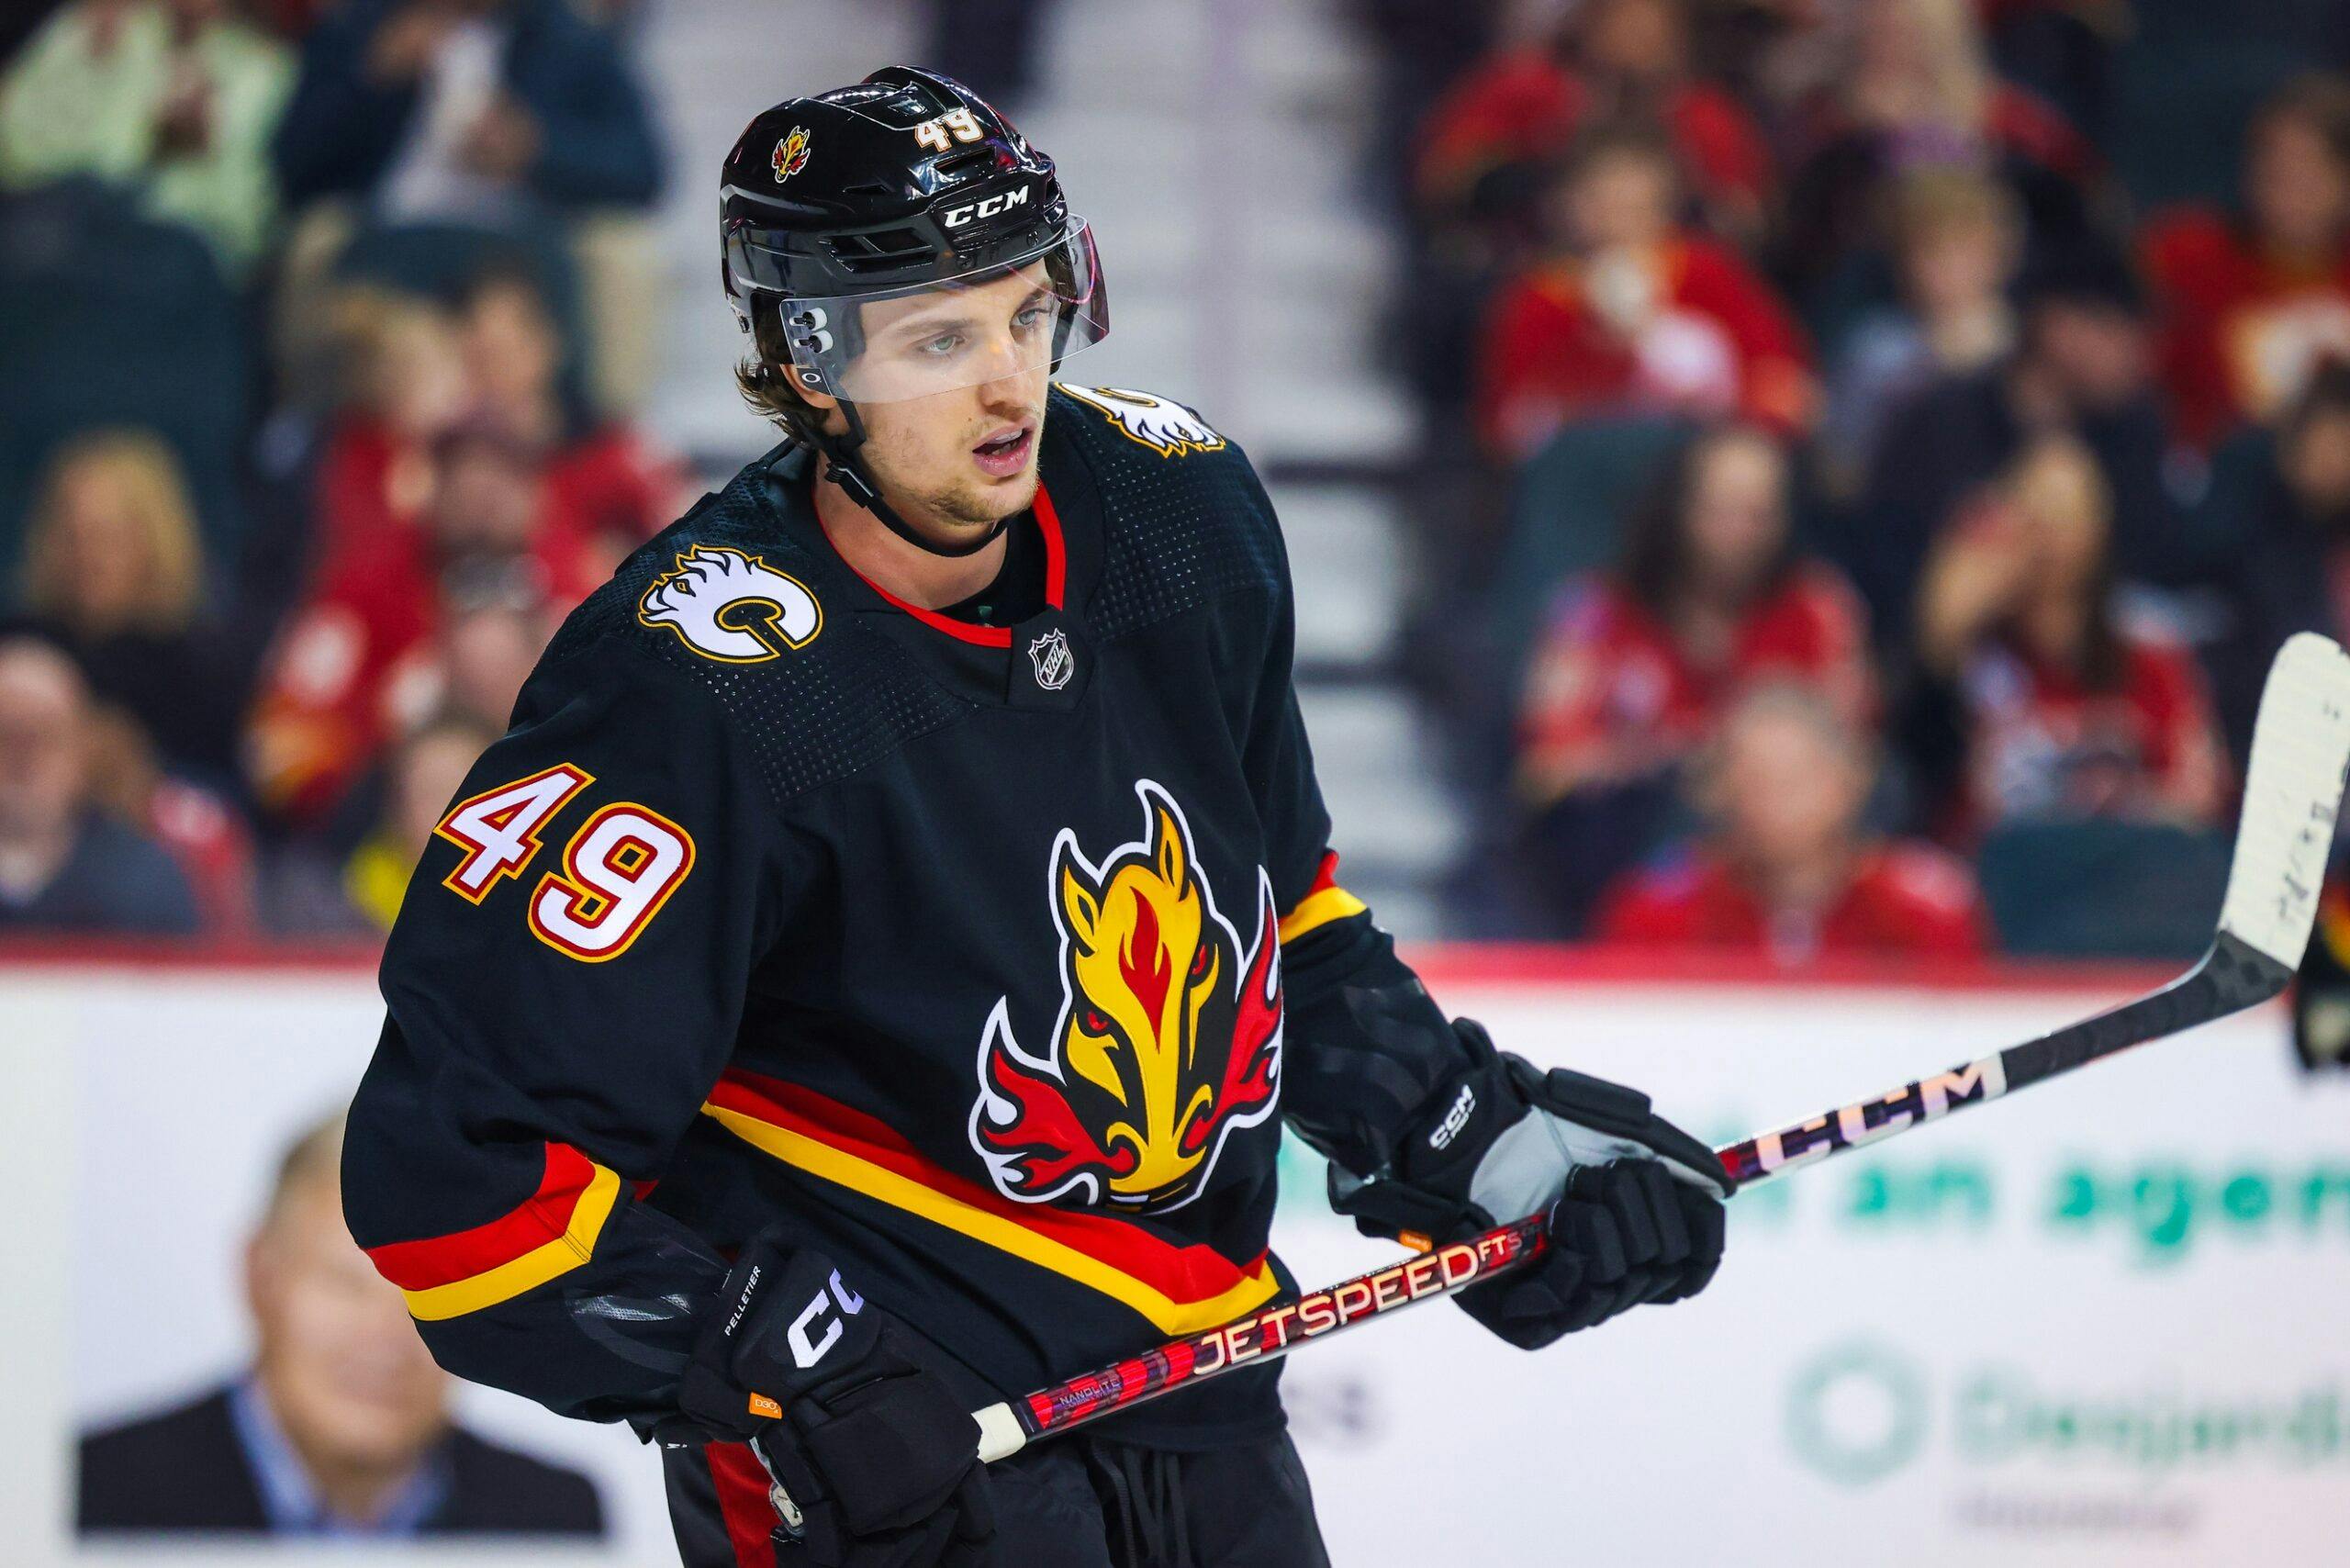 Calgary Flames’ Jakob Pelletier ruled out indefinitely with shoulder injury